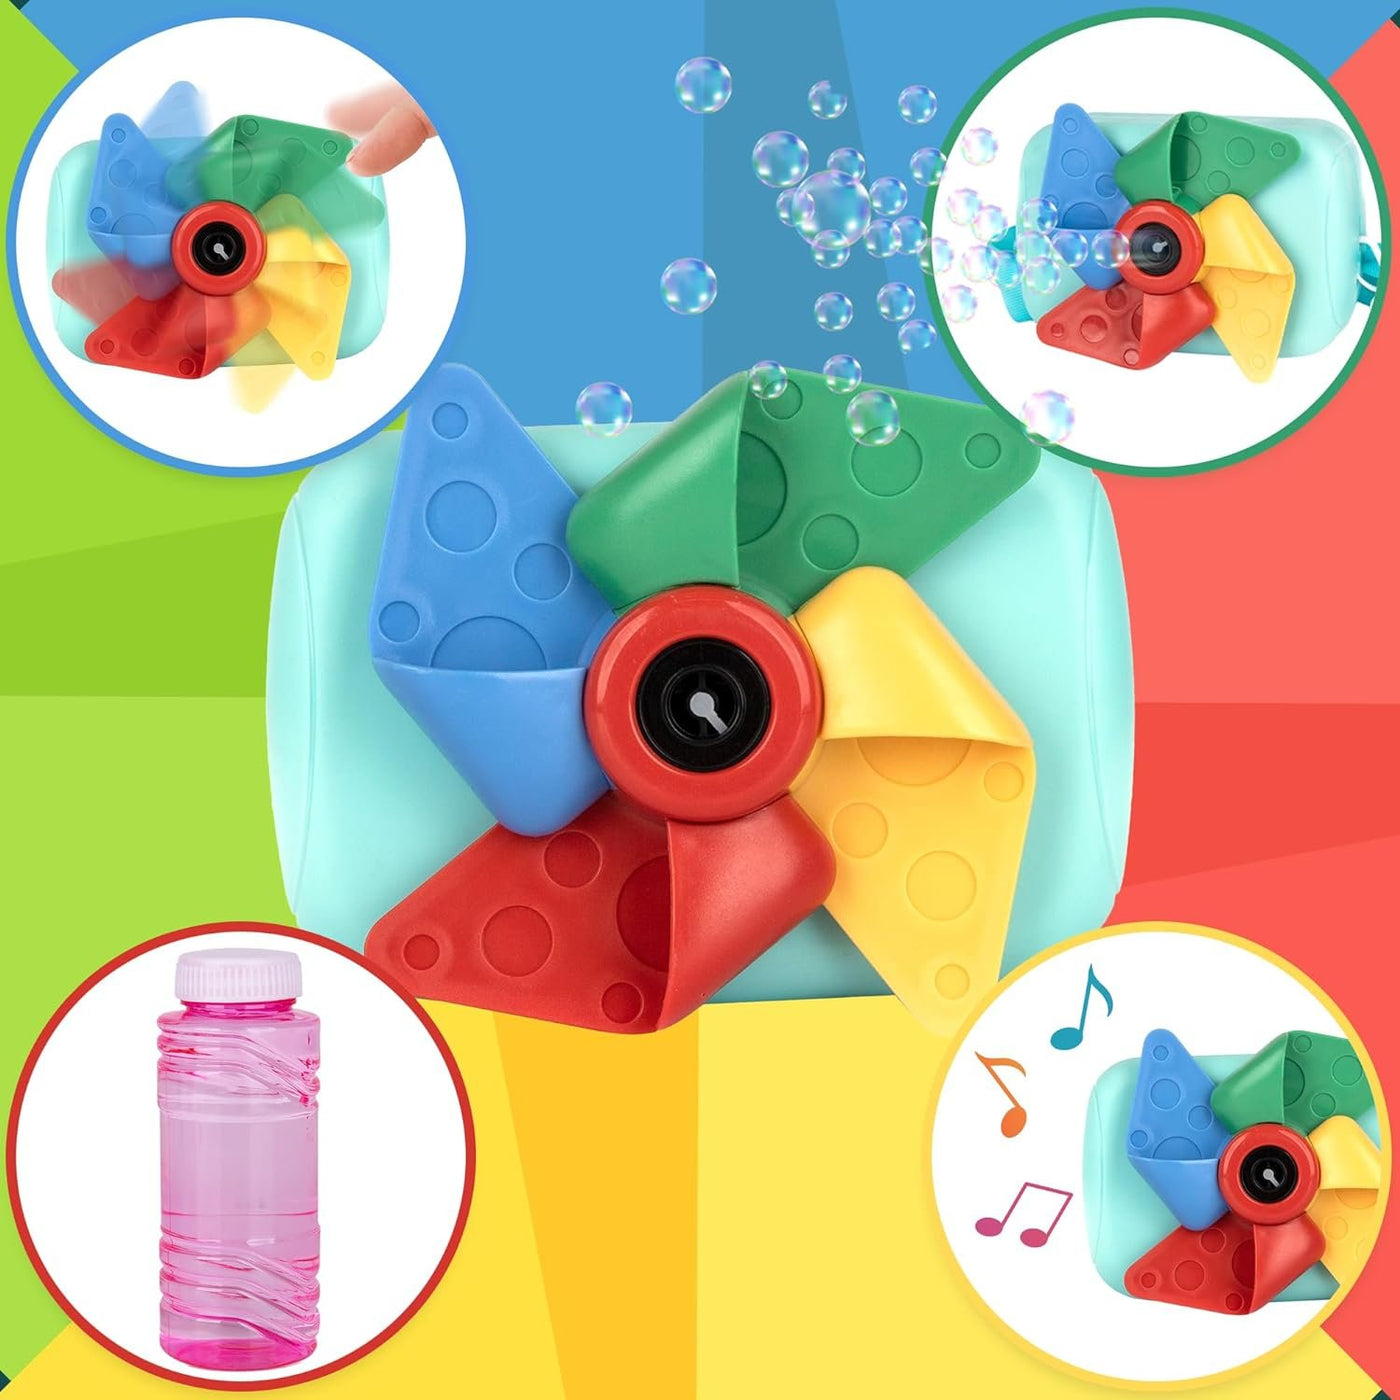 Pinwheel Camera Bubble Machine for Kids - Camera Shaped Bubble Toy with Neck Strap and Solution - Small Bubble Machine for Kids with Sounds, Music, and Lights for Extra Fun